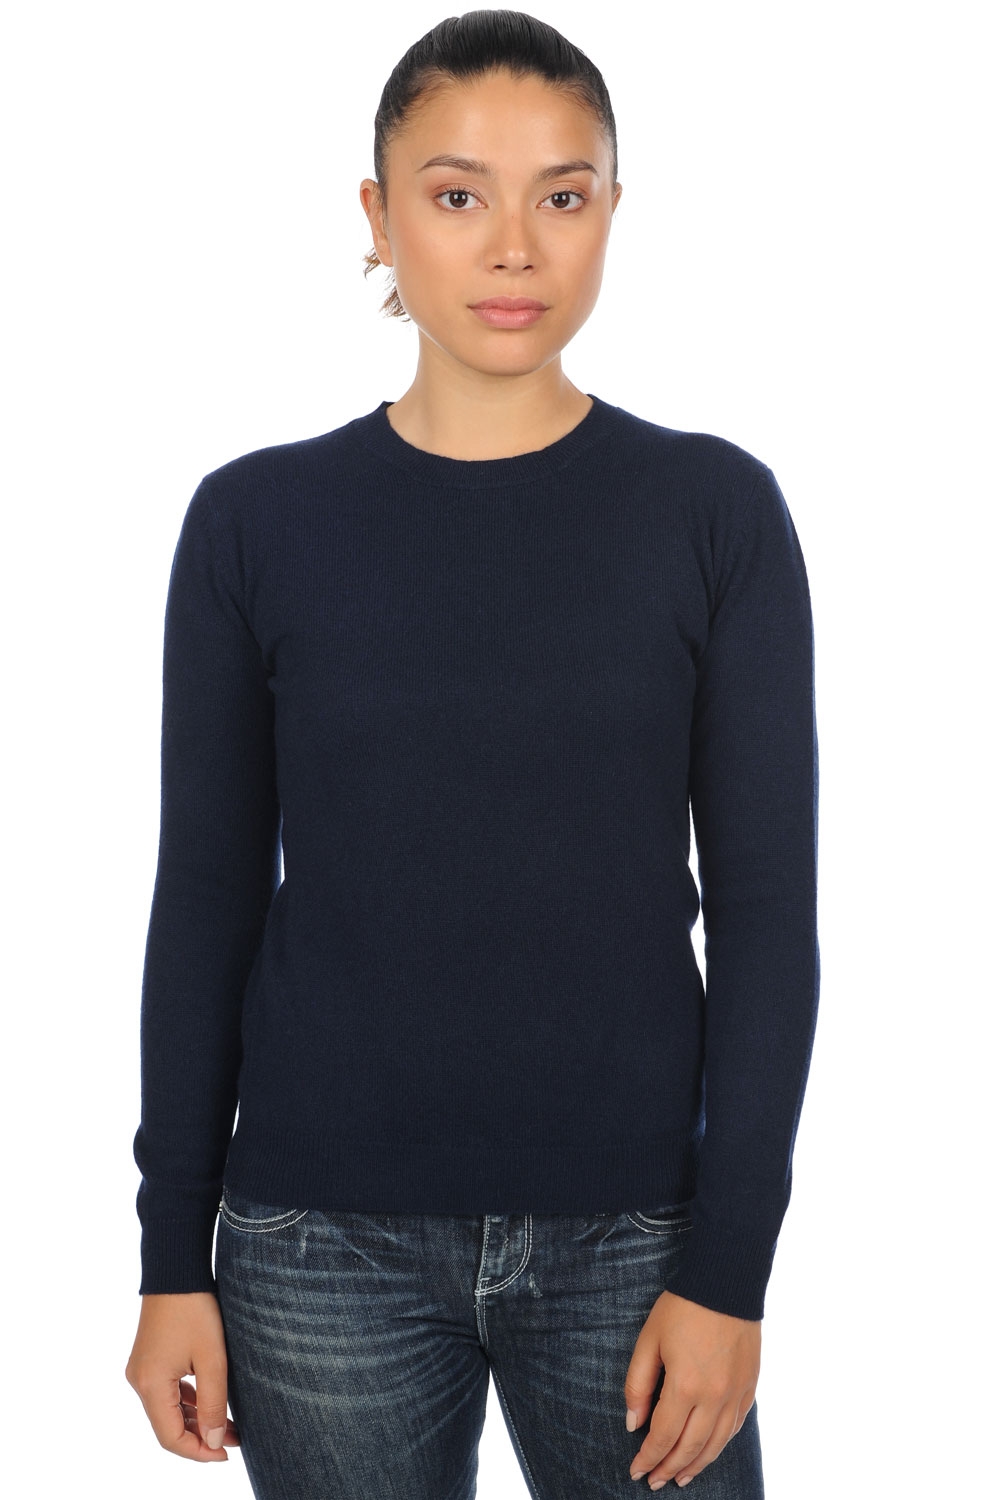 Cashmere ladies basic sweaters at low prices thalia first dress blue xs